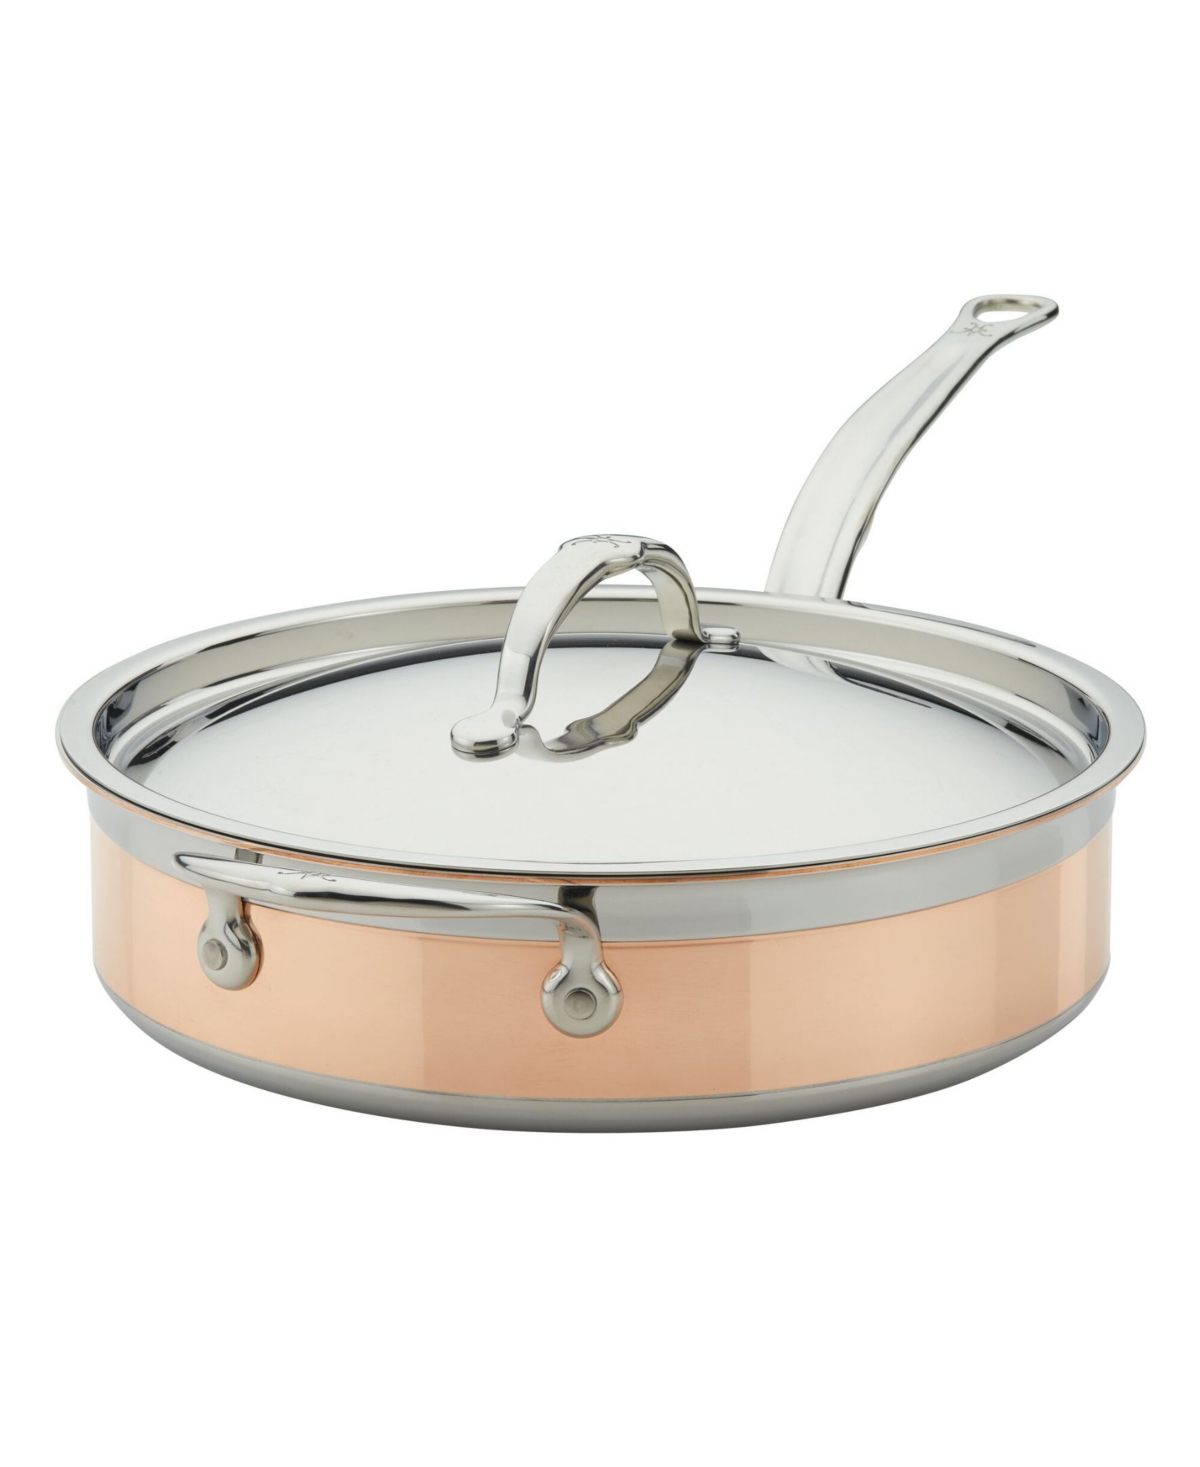 Hestan Copperbond Copper Induction 3.5-quart Covered Saute With Helper Handle In Brown